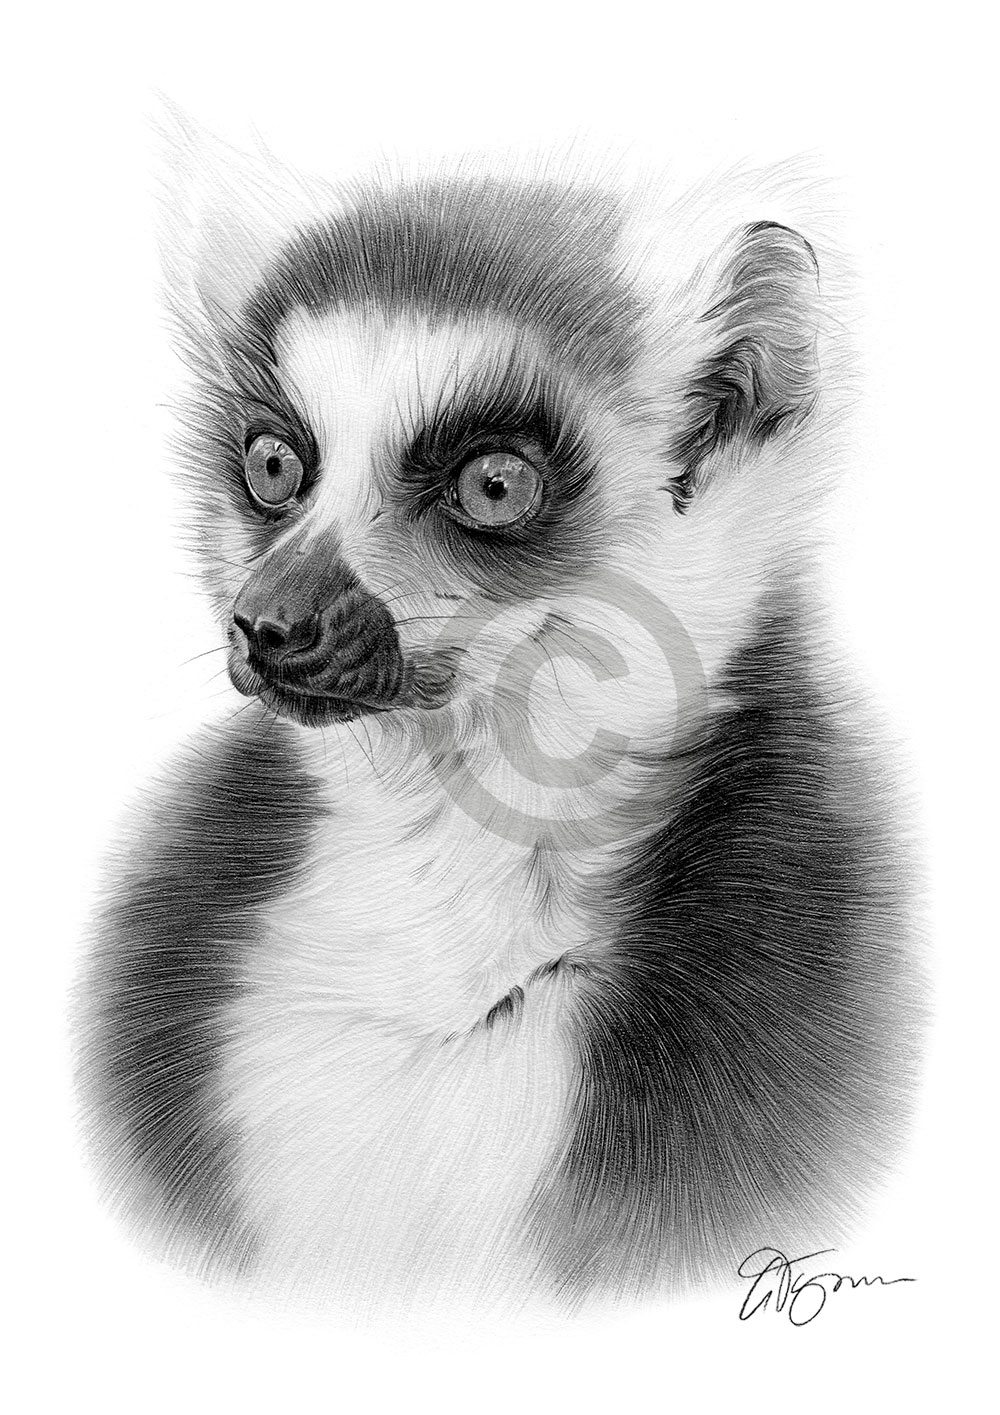 Pencil drawing of a ring-tailed lemur by artist Gary Tymon